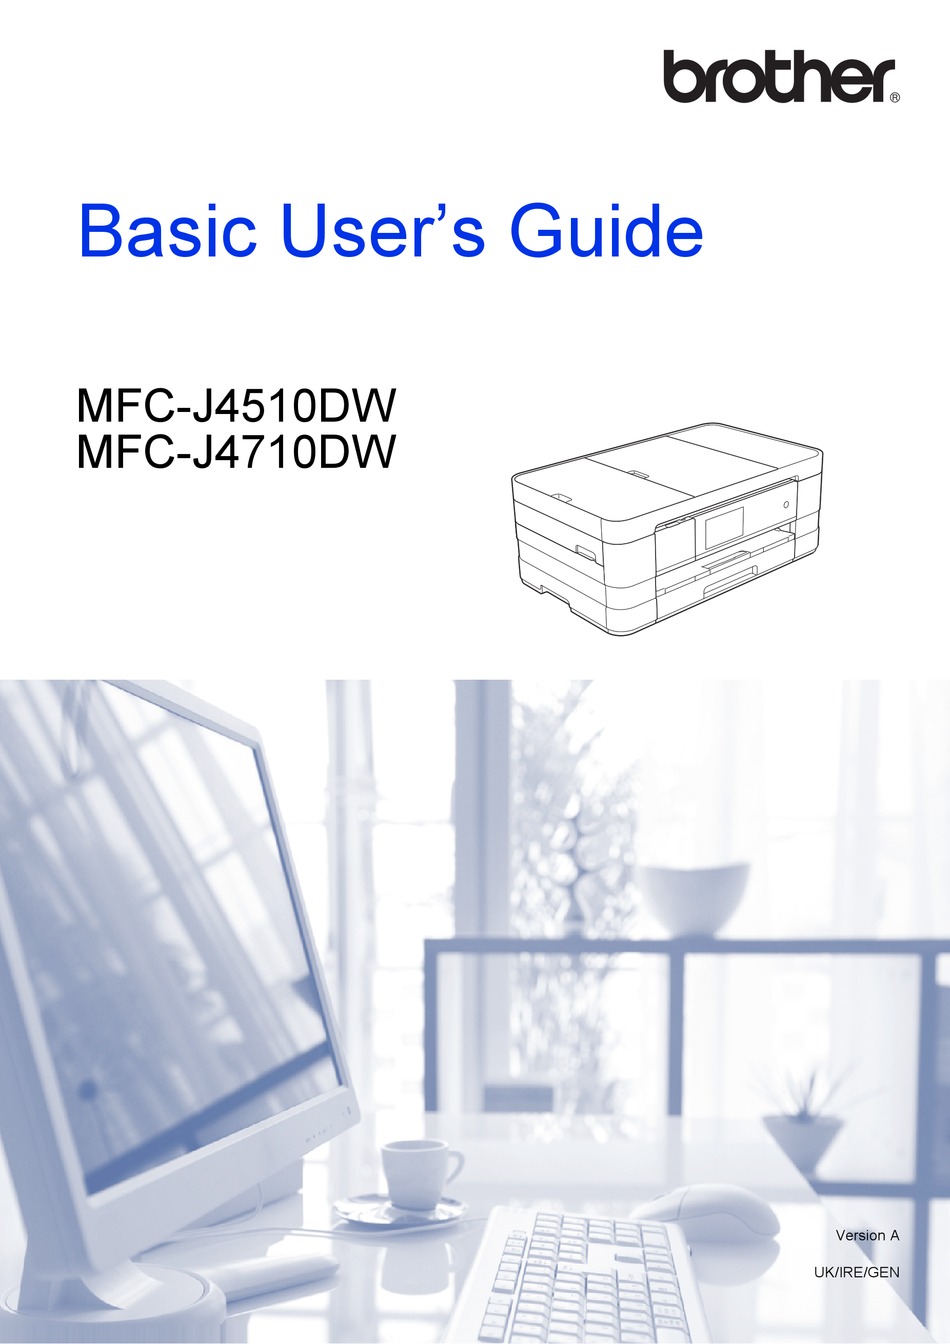 manual for brother mfc j4510dw printer